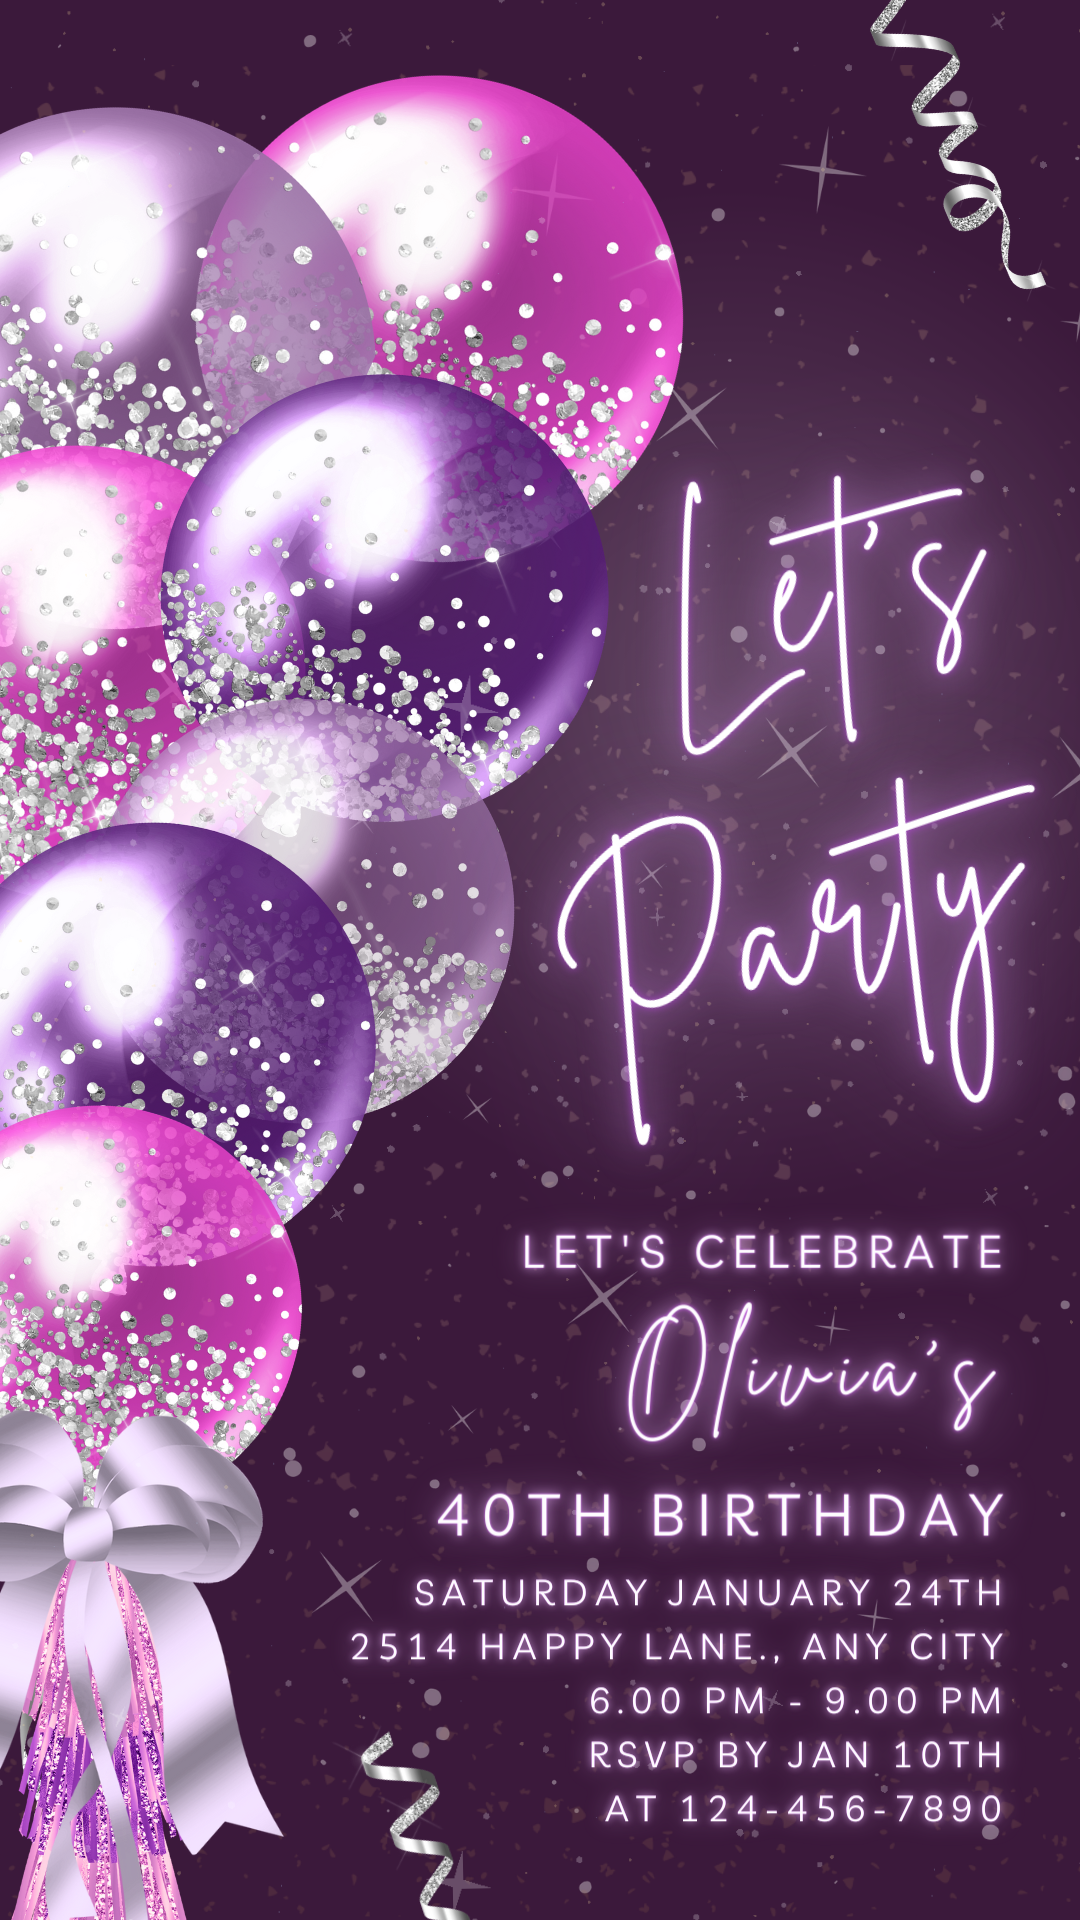 Let's Party Animated Invite for any Event Celebration, Editable Video Template, Birthday invitation, any Age | Shade of Purple Party E-vite